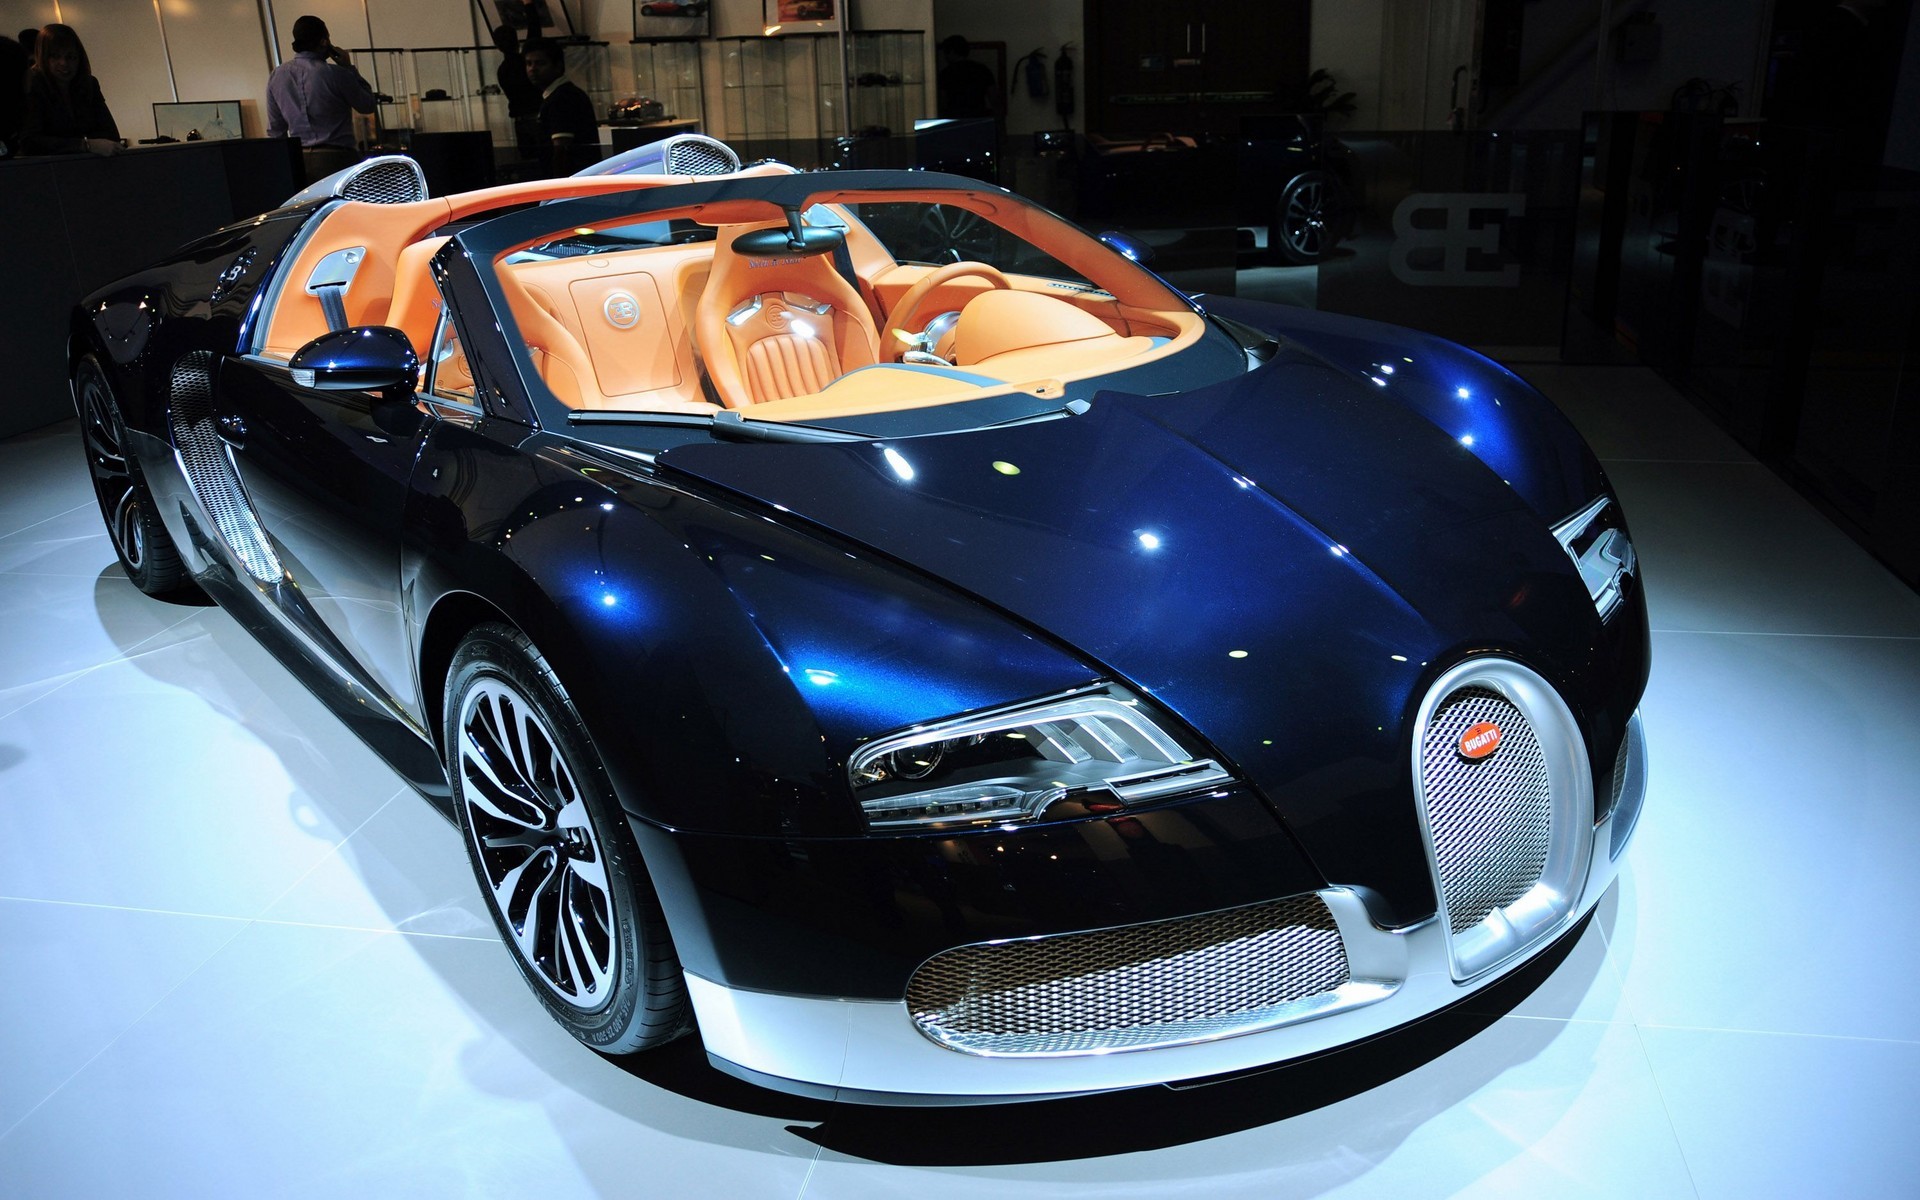 Bugatti Veyron, Car Wallpapers HD / Desktop and Mobile Backgrounds